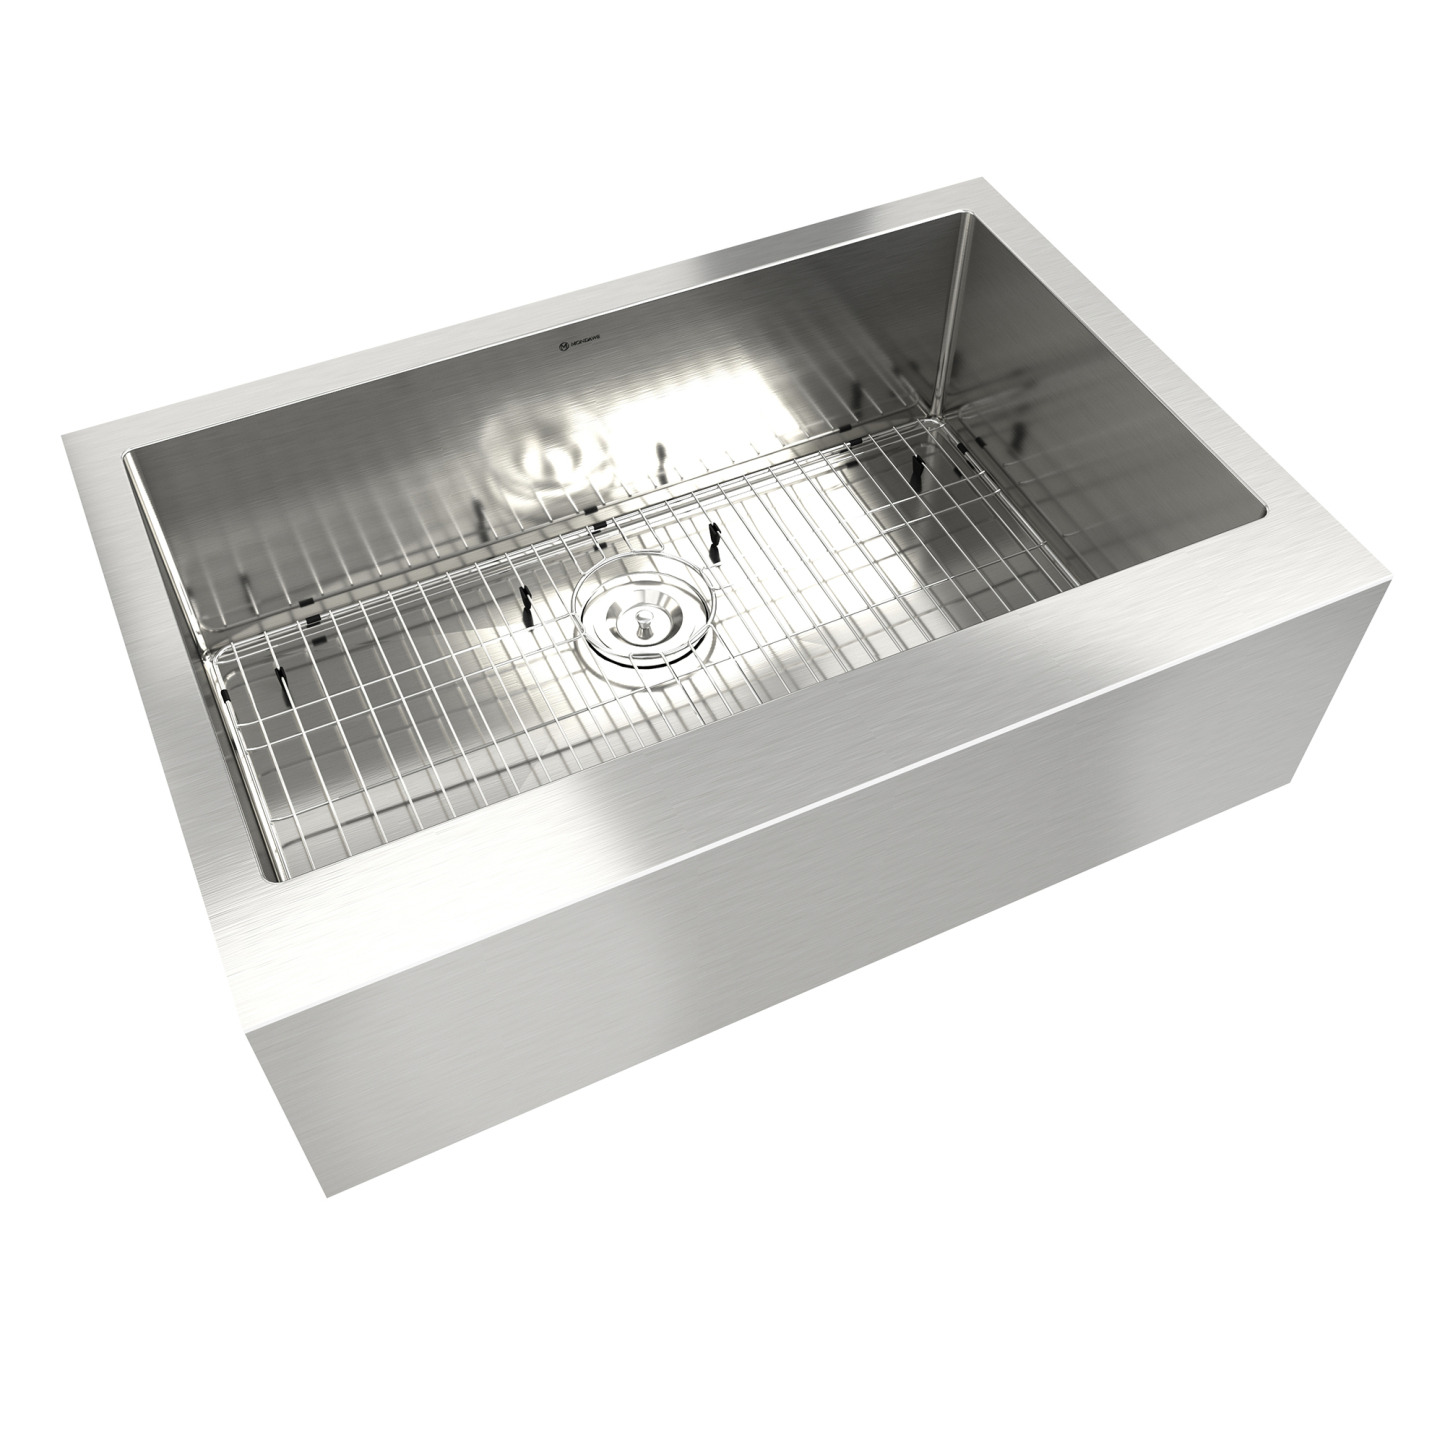 Farmhouse Apron Front 33-in x 22-in Brushed Stainless Steel Single Bowl Kitchen Sink-Mondawe